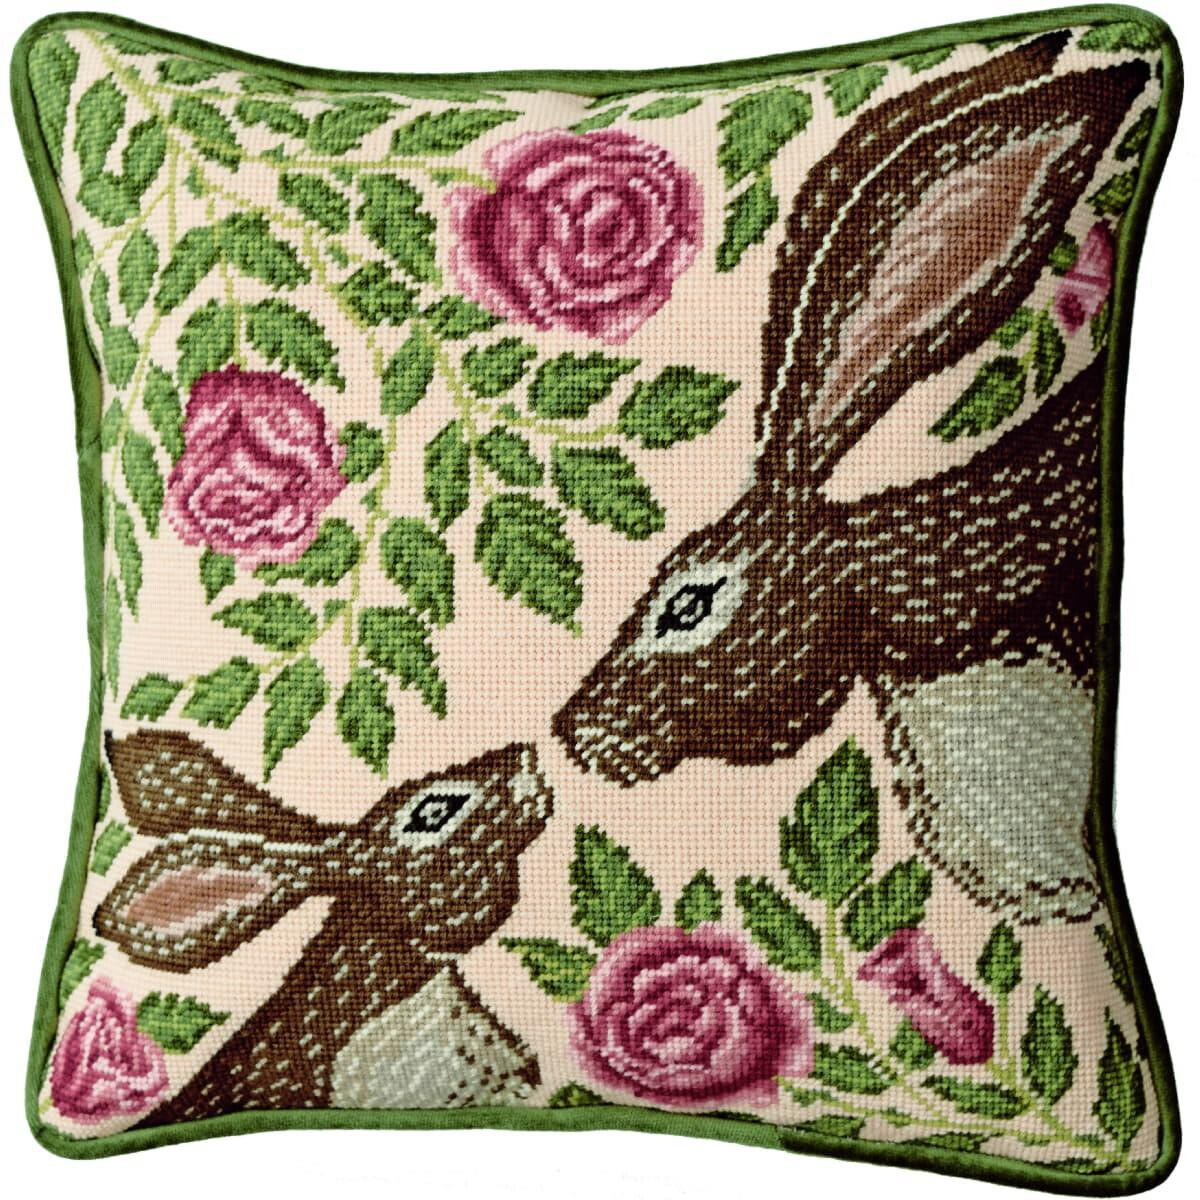 An embroidered picture of two brown rabbits with pink...